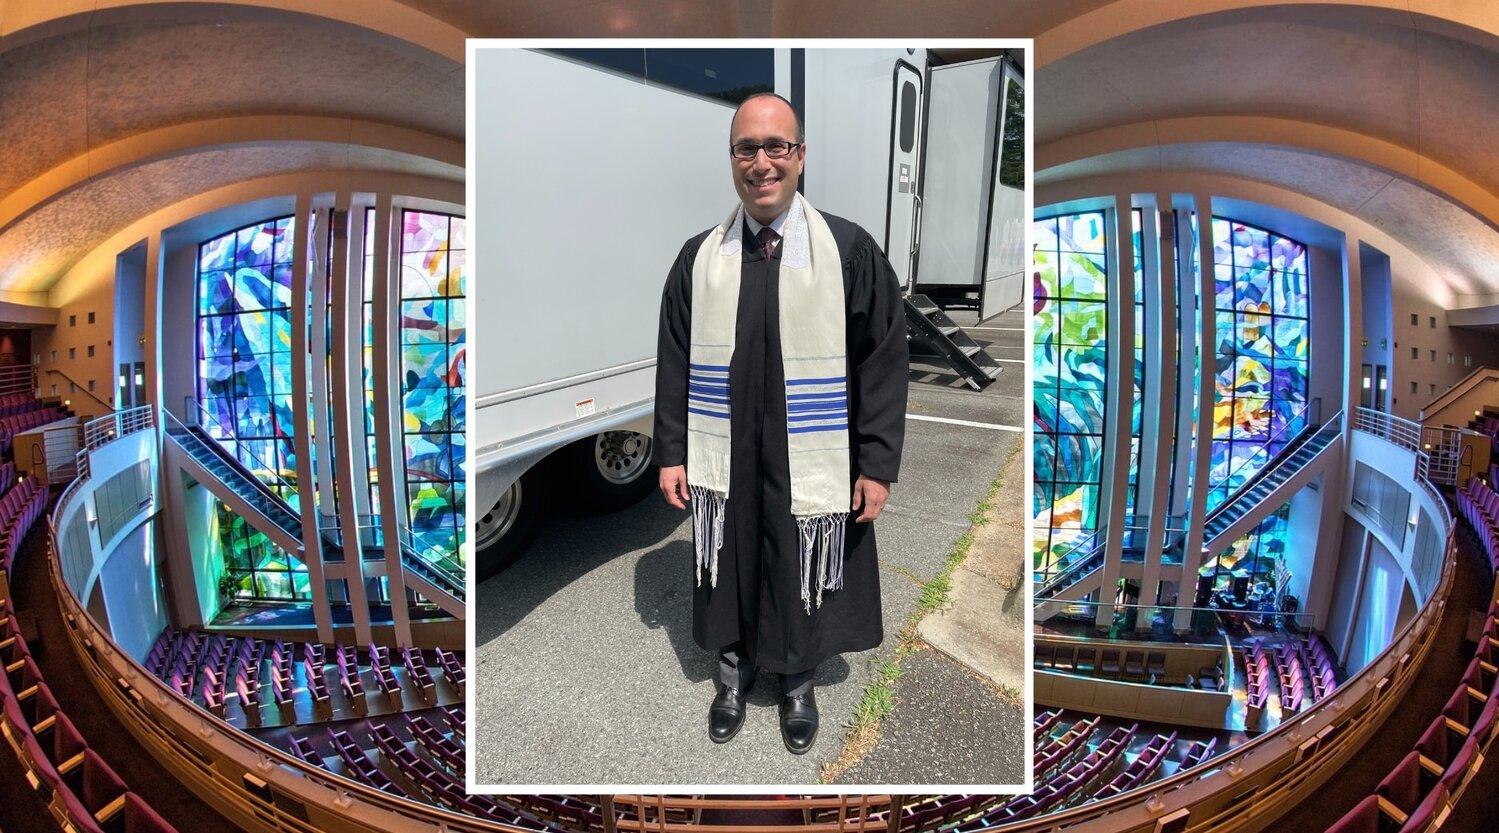 Rabbi Michael Wolk stands in his rabbi-character costume outside the production trailers for “Are You There God? It's Me, Margaret,” which filmed in his synagogue, Temple Israel of Charlotte, North Carolina.